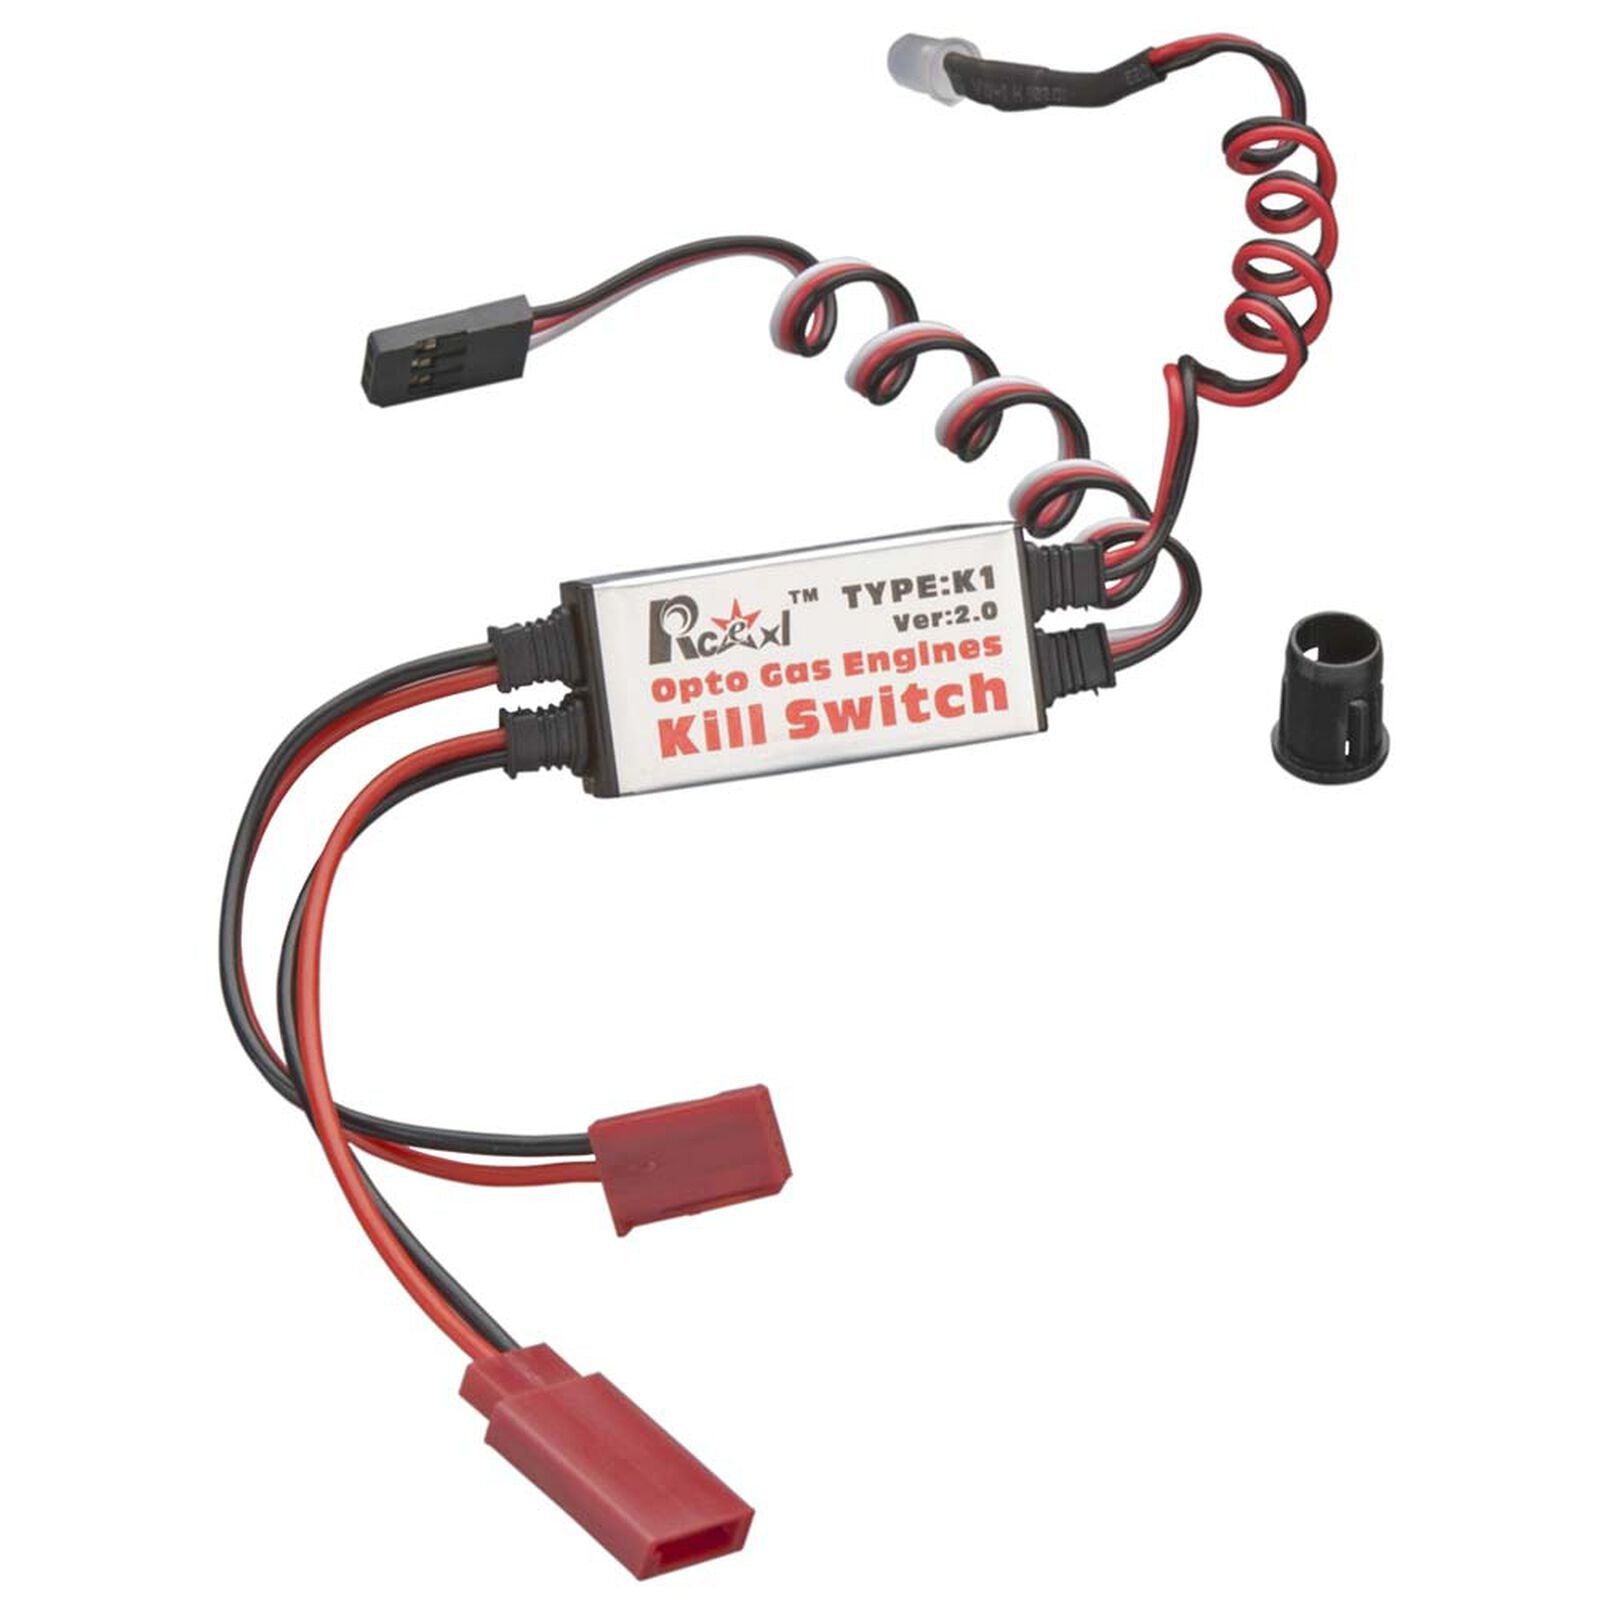 DLE ENGINES DLEG9205 Opto Gas Engine Kill Switch V2.0